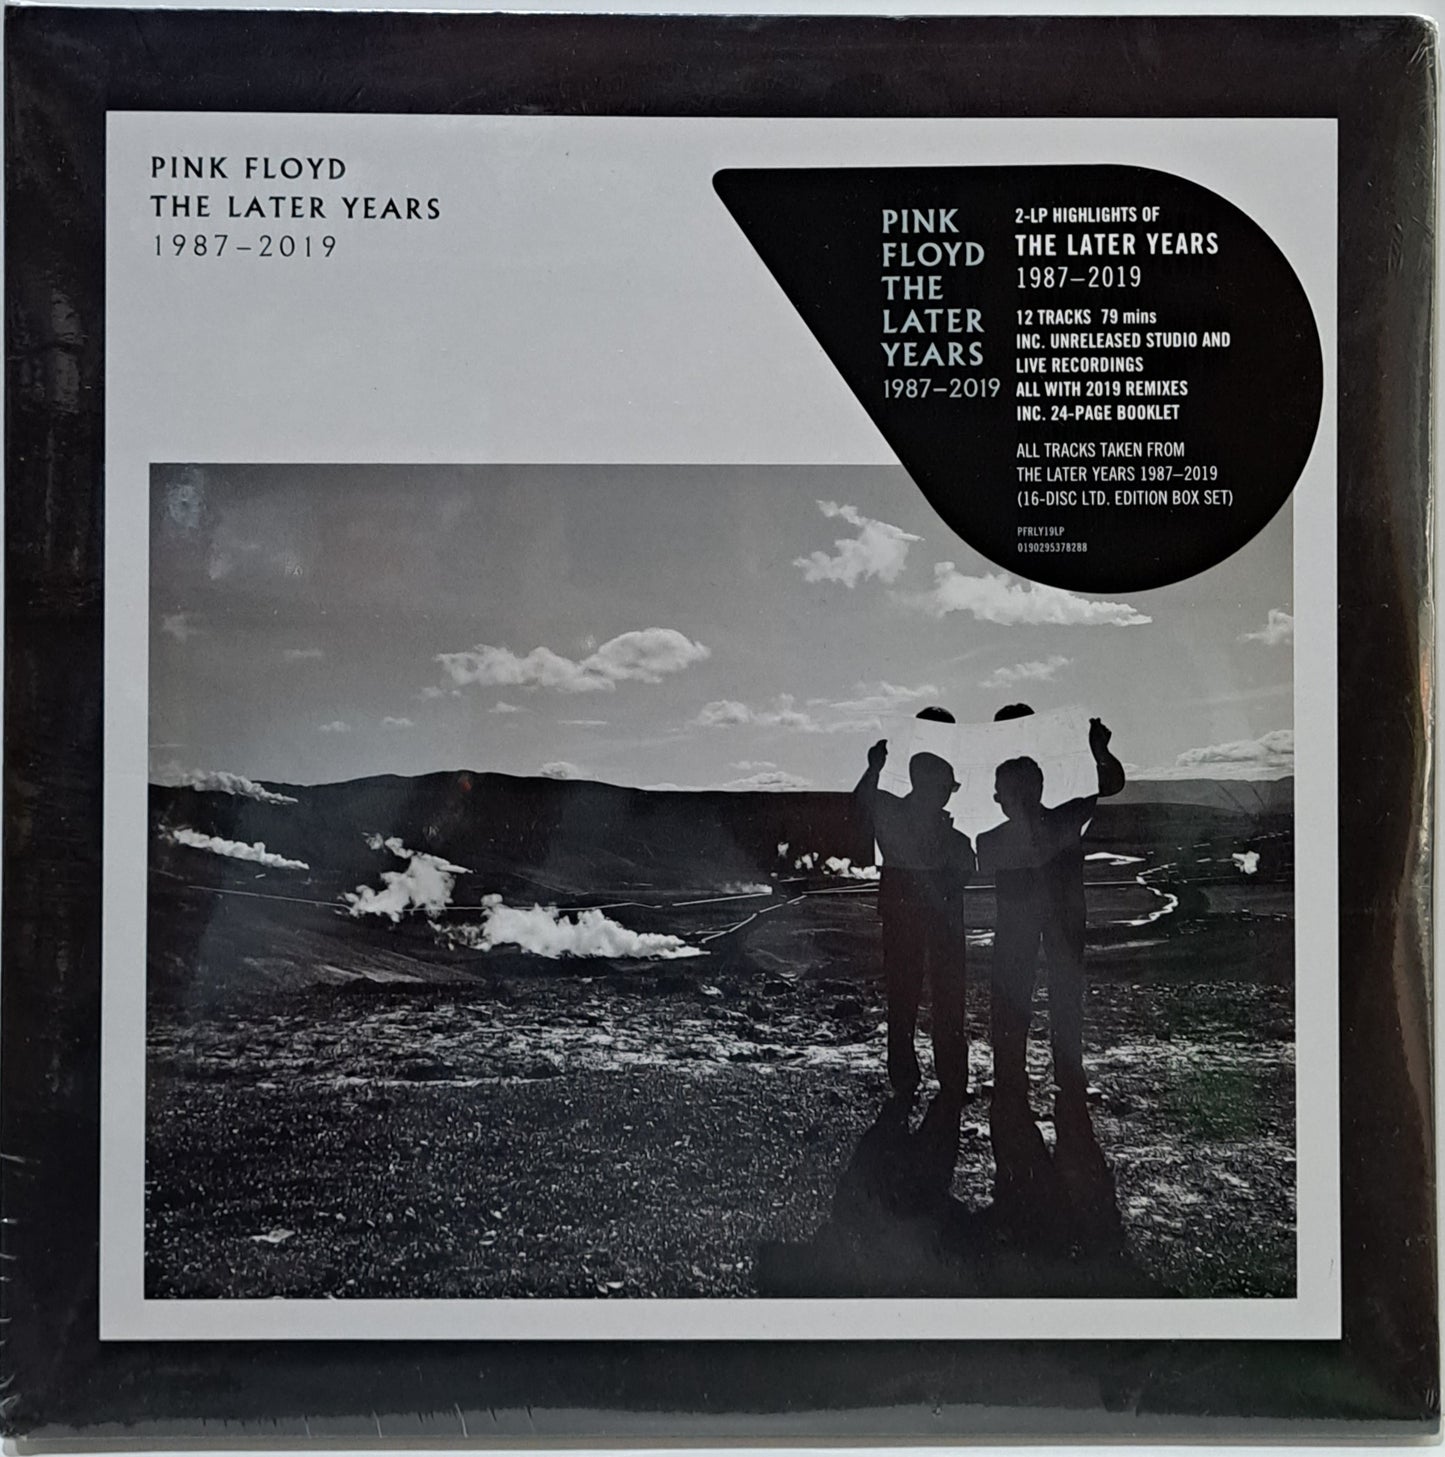 PINK FLOYD - THE LATER YEARS 1987 2019 2 LPS